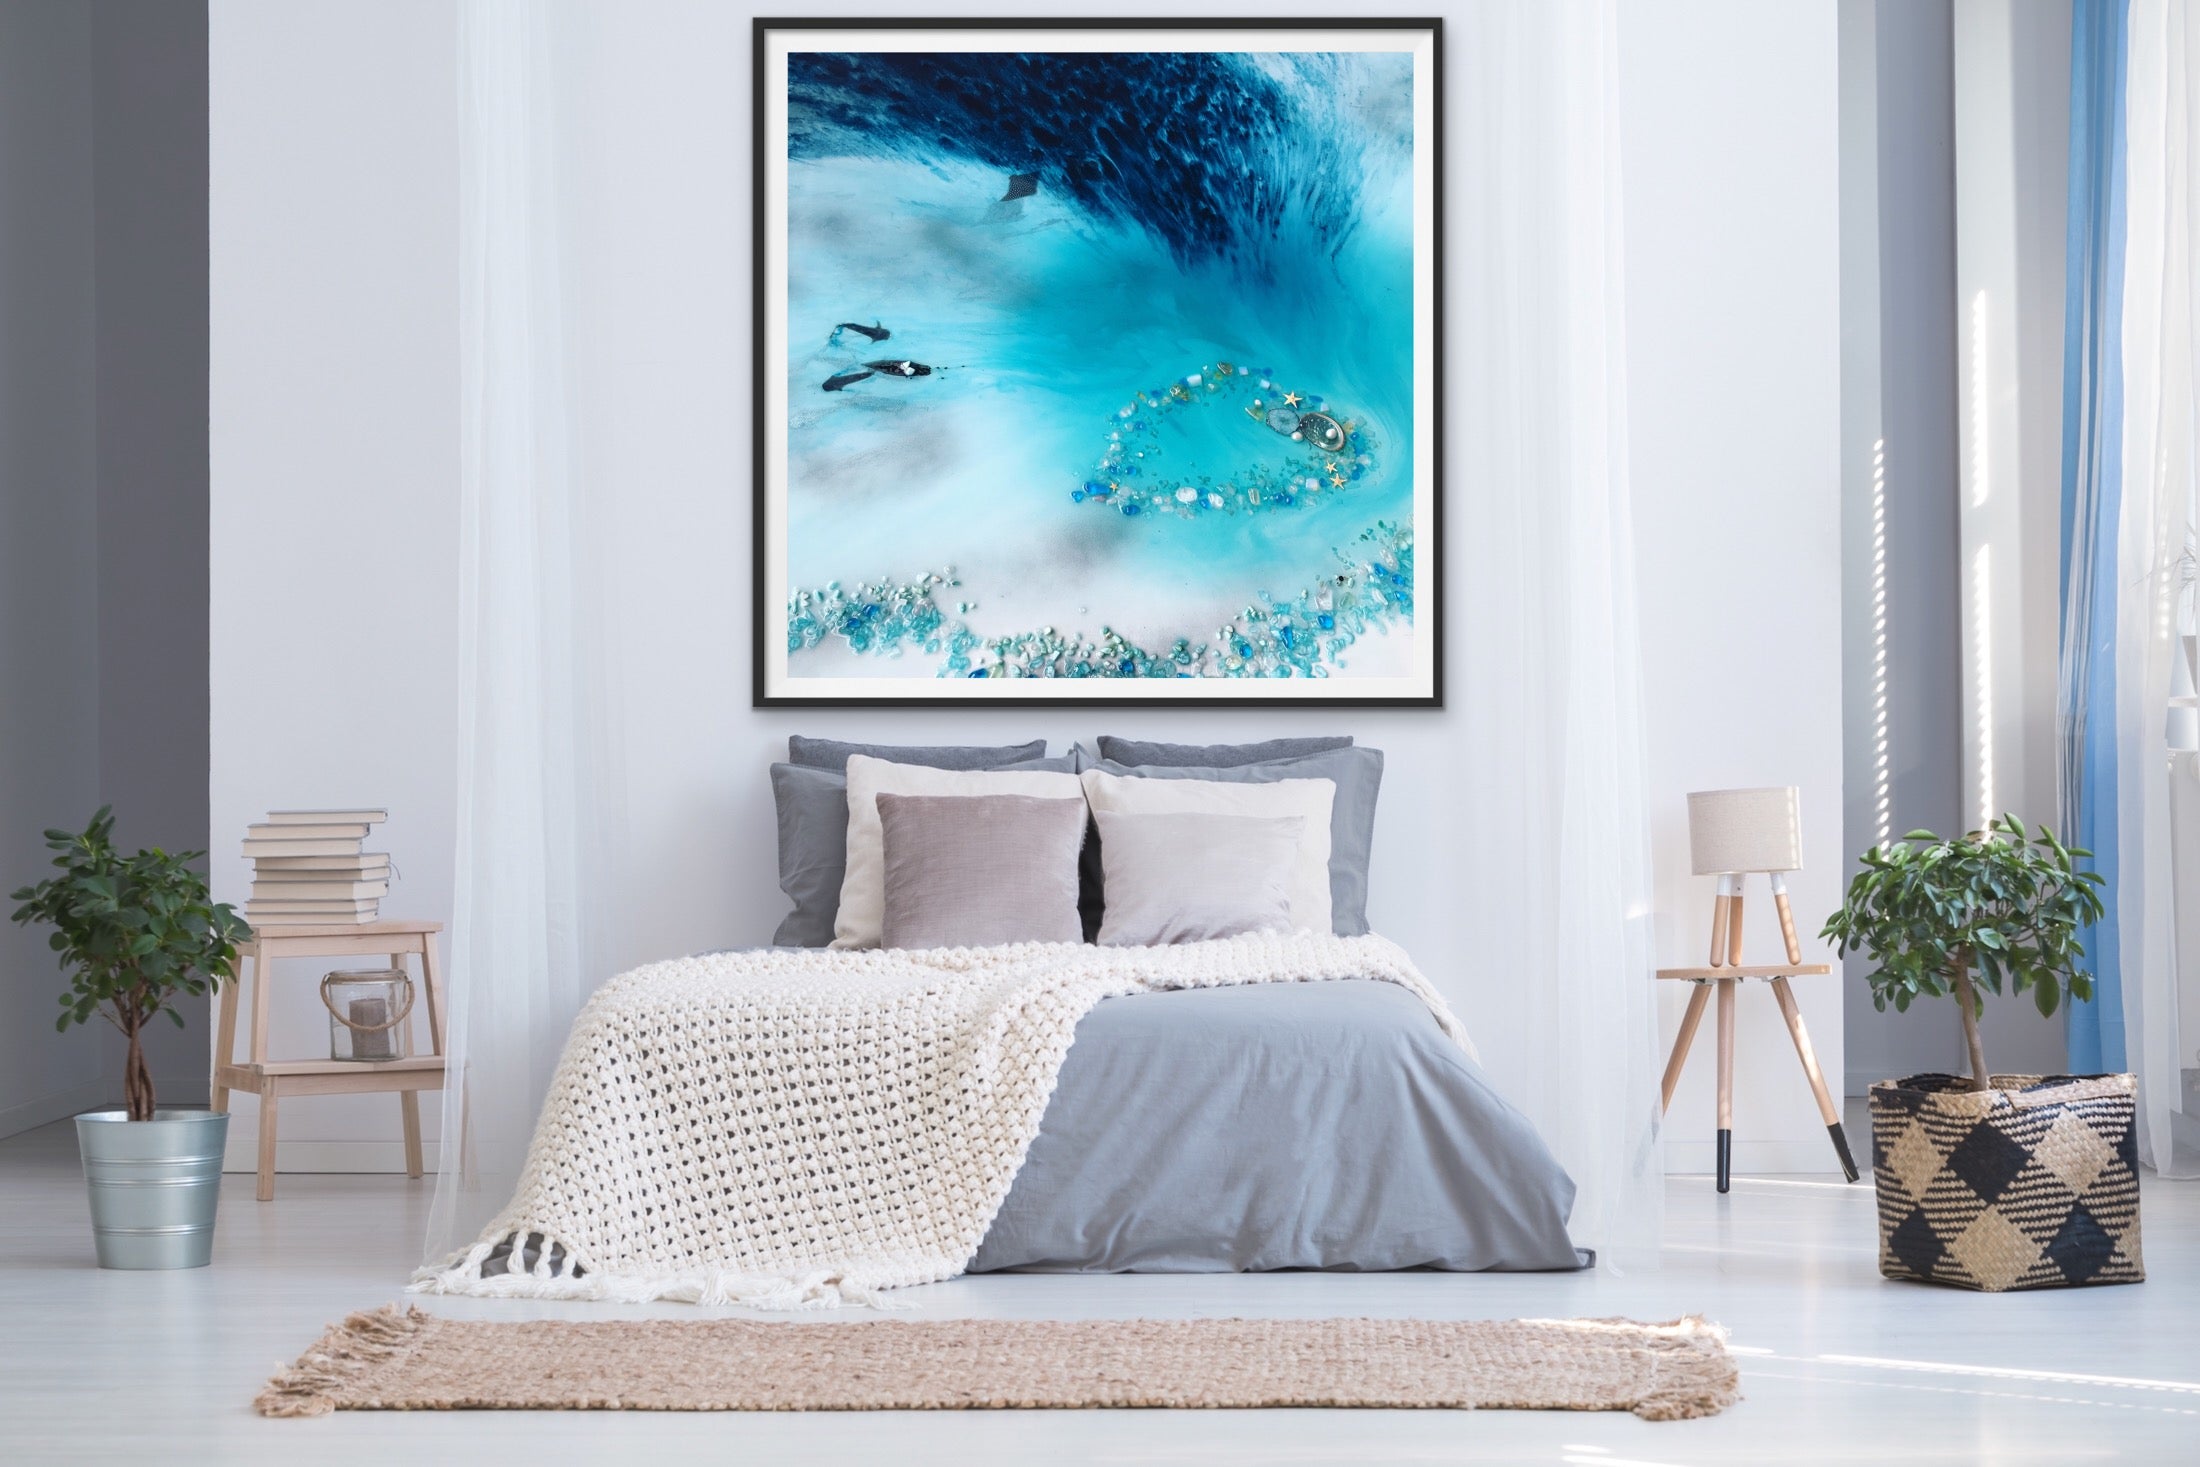 Abstract Seascape. Aqua and Teal. Blue Lagoon. Art Print. Antuanelle 3 Lagoon Tropical Reef Artwork. Limited Edition Print